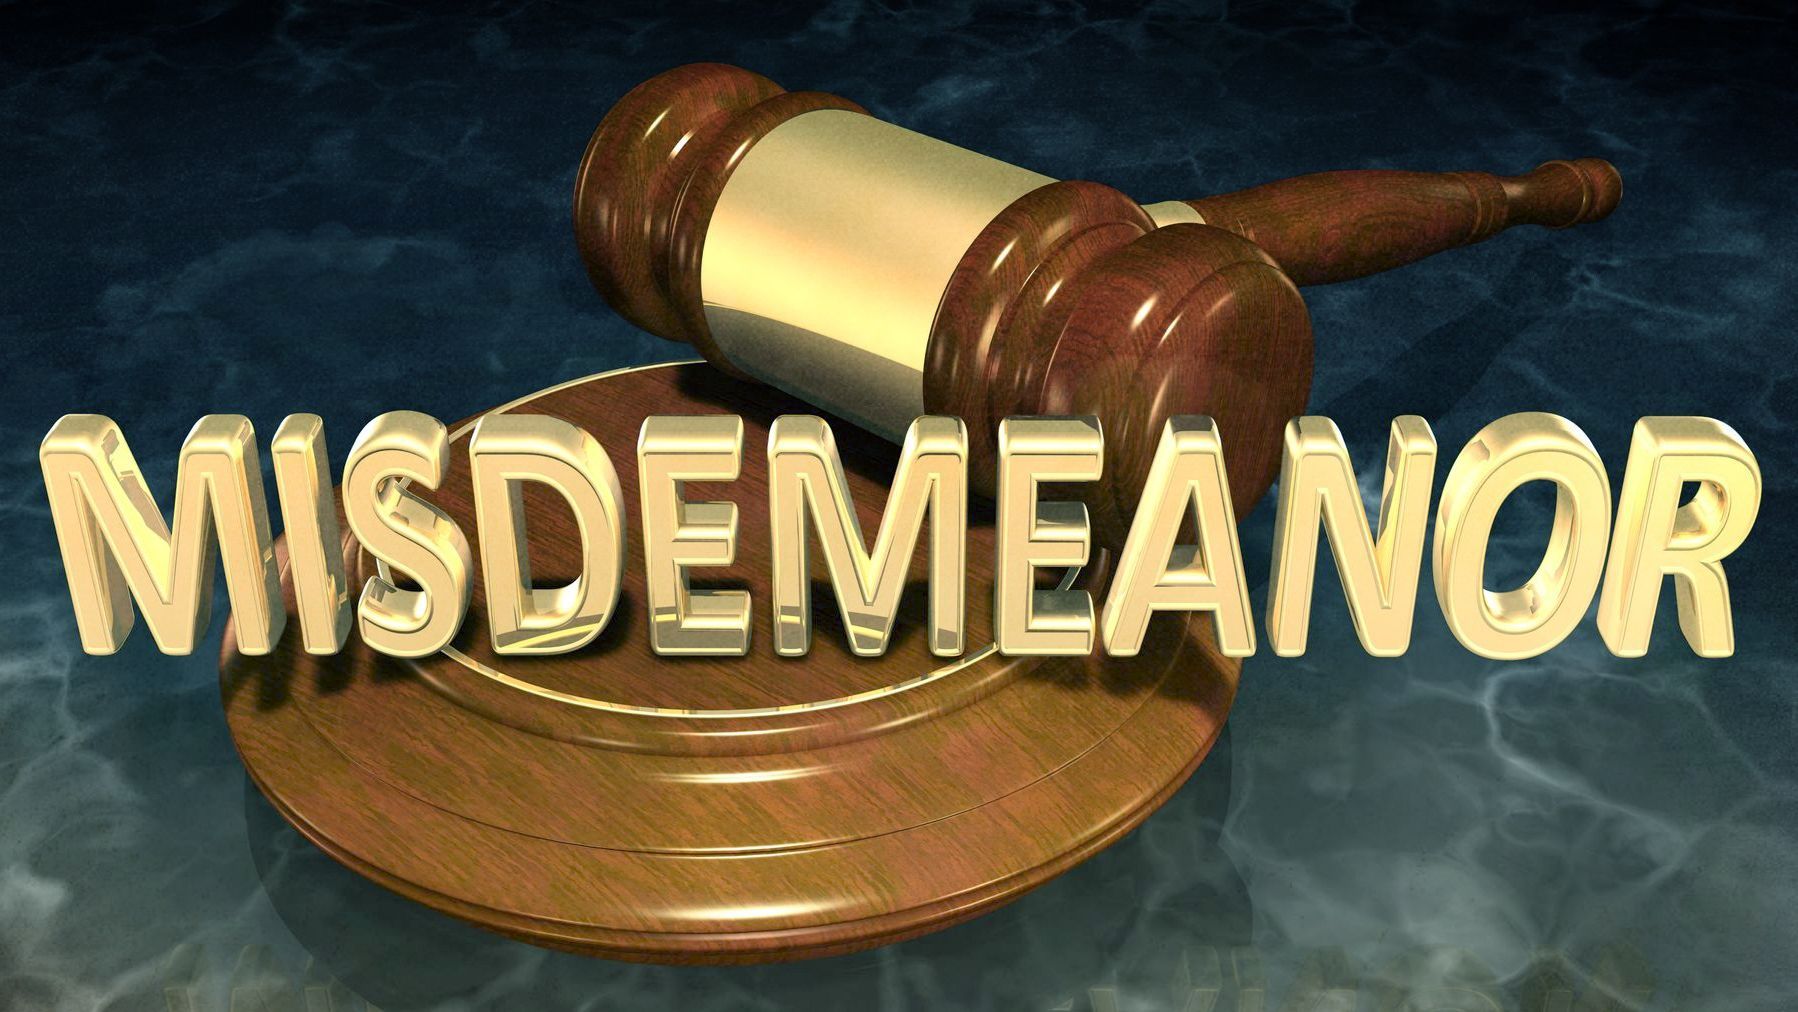 Do You Need a Criminal Defense Lawyer for a Misdemeanor Charge?